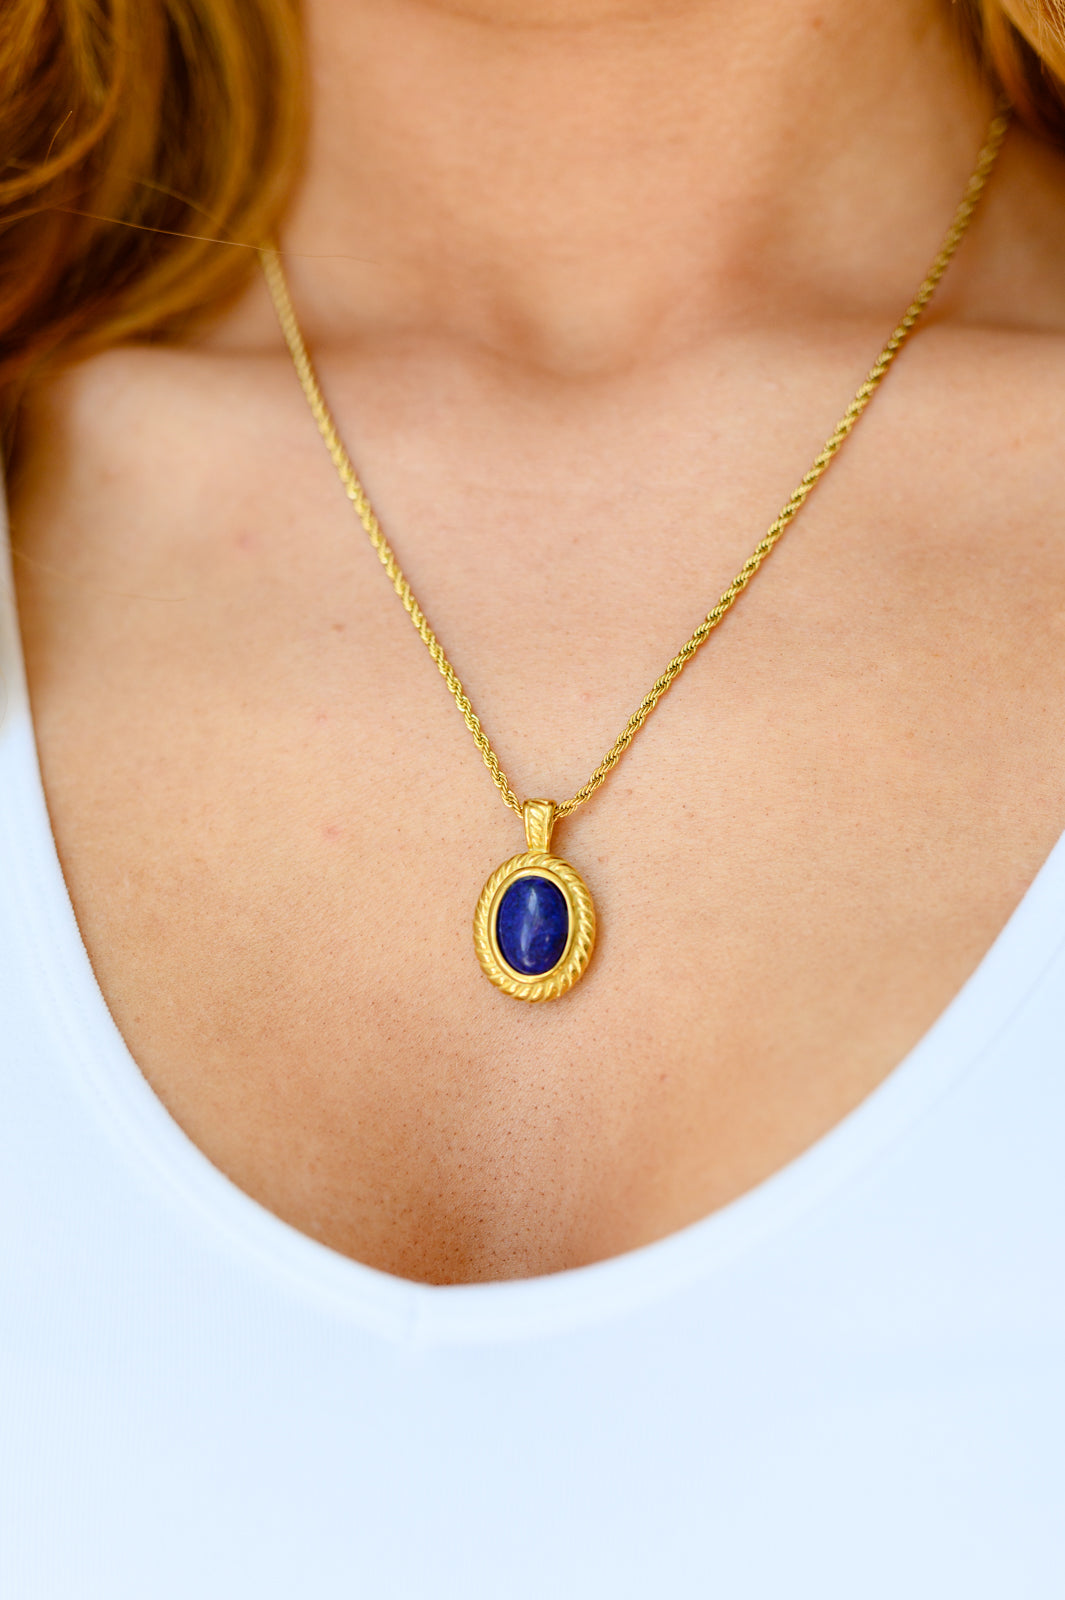 Waterproof Jewelry: Lovely Lapis Lazuli Pendent Necklace